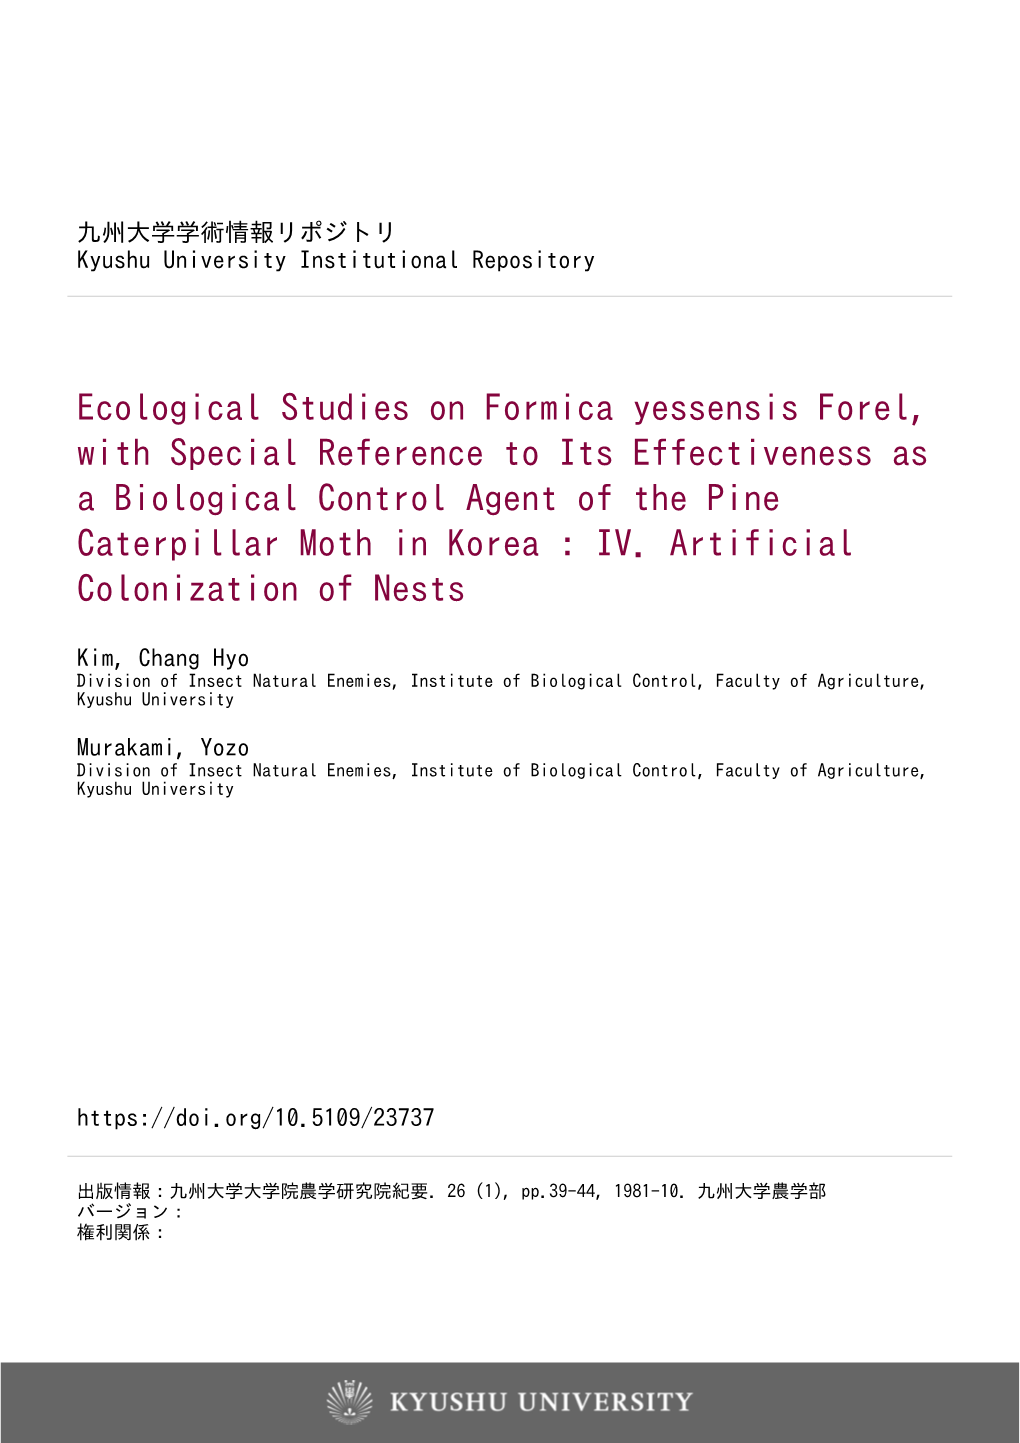 Ecological Studies on Formica Yessensis Forel, with Special Reference to Its Effectiveness As a Biological Control Agent of the Pine Caterpillar Moth in Korea : IV